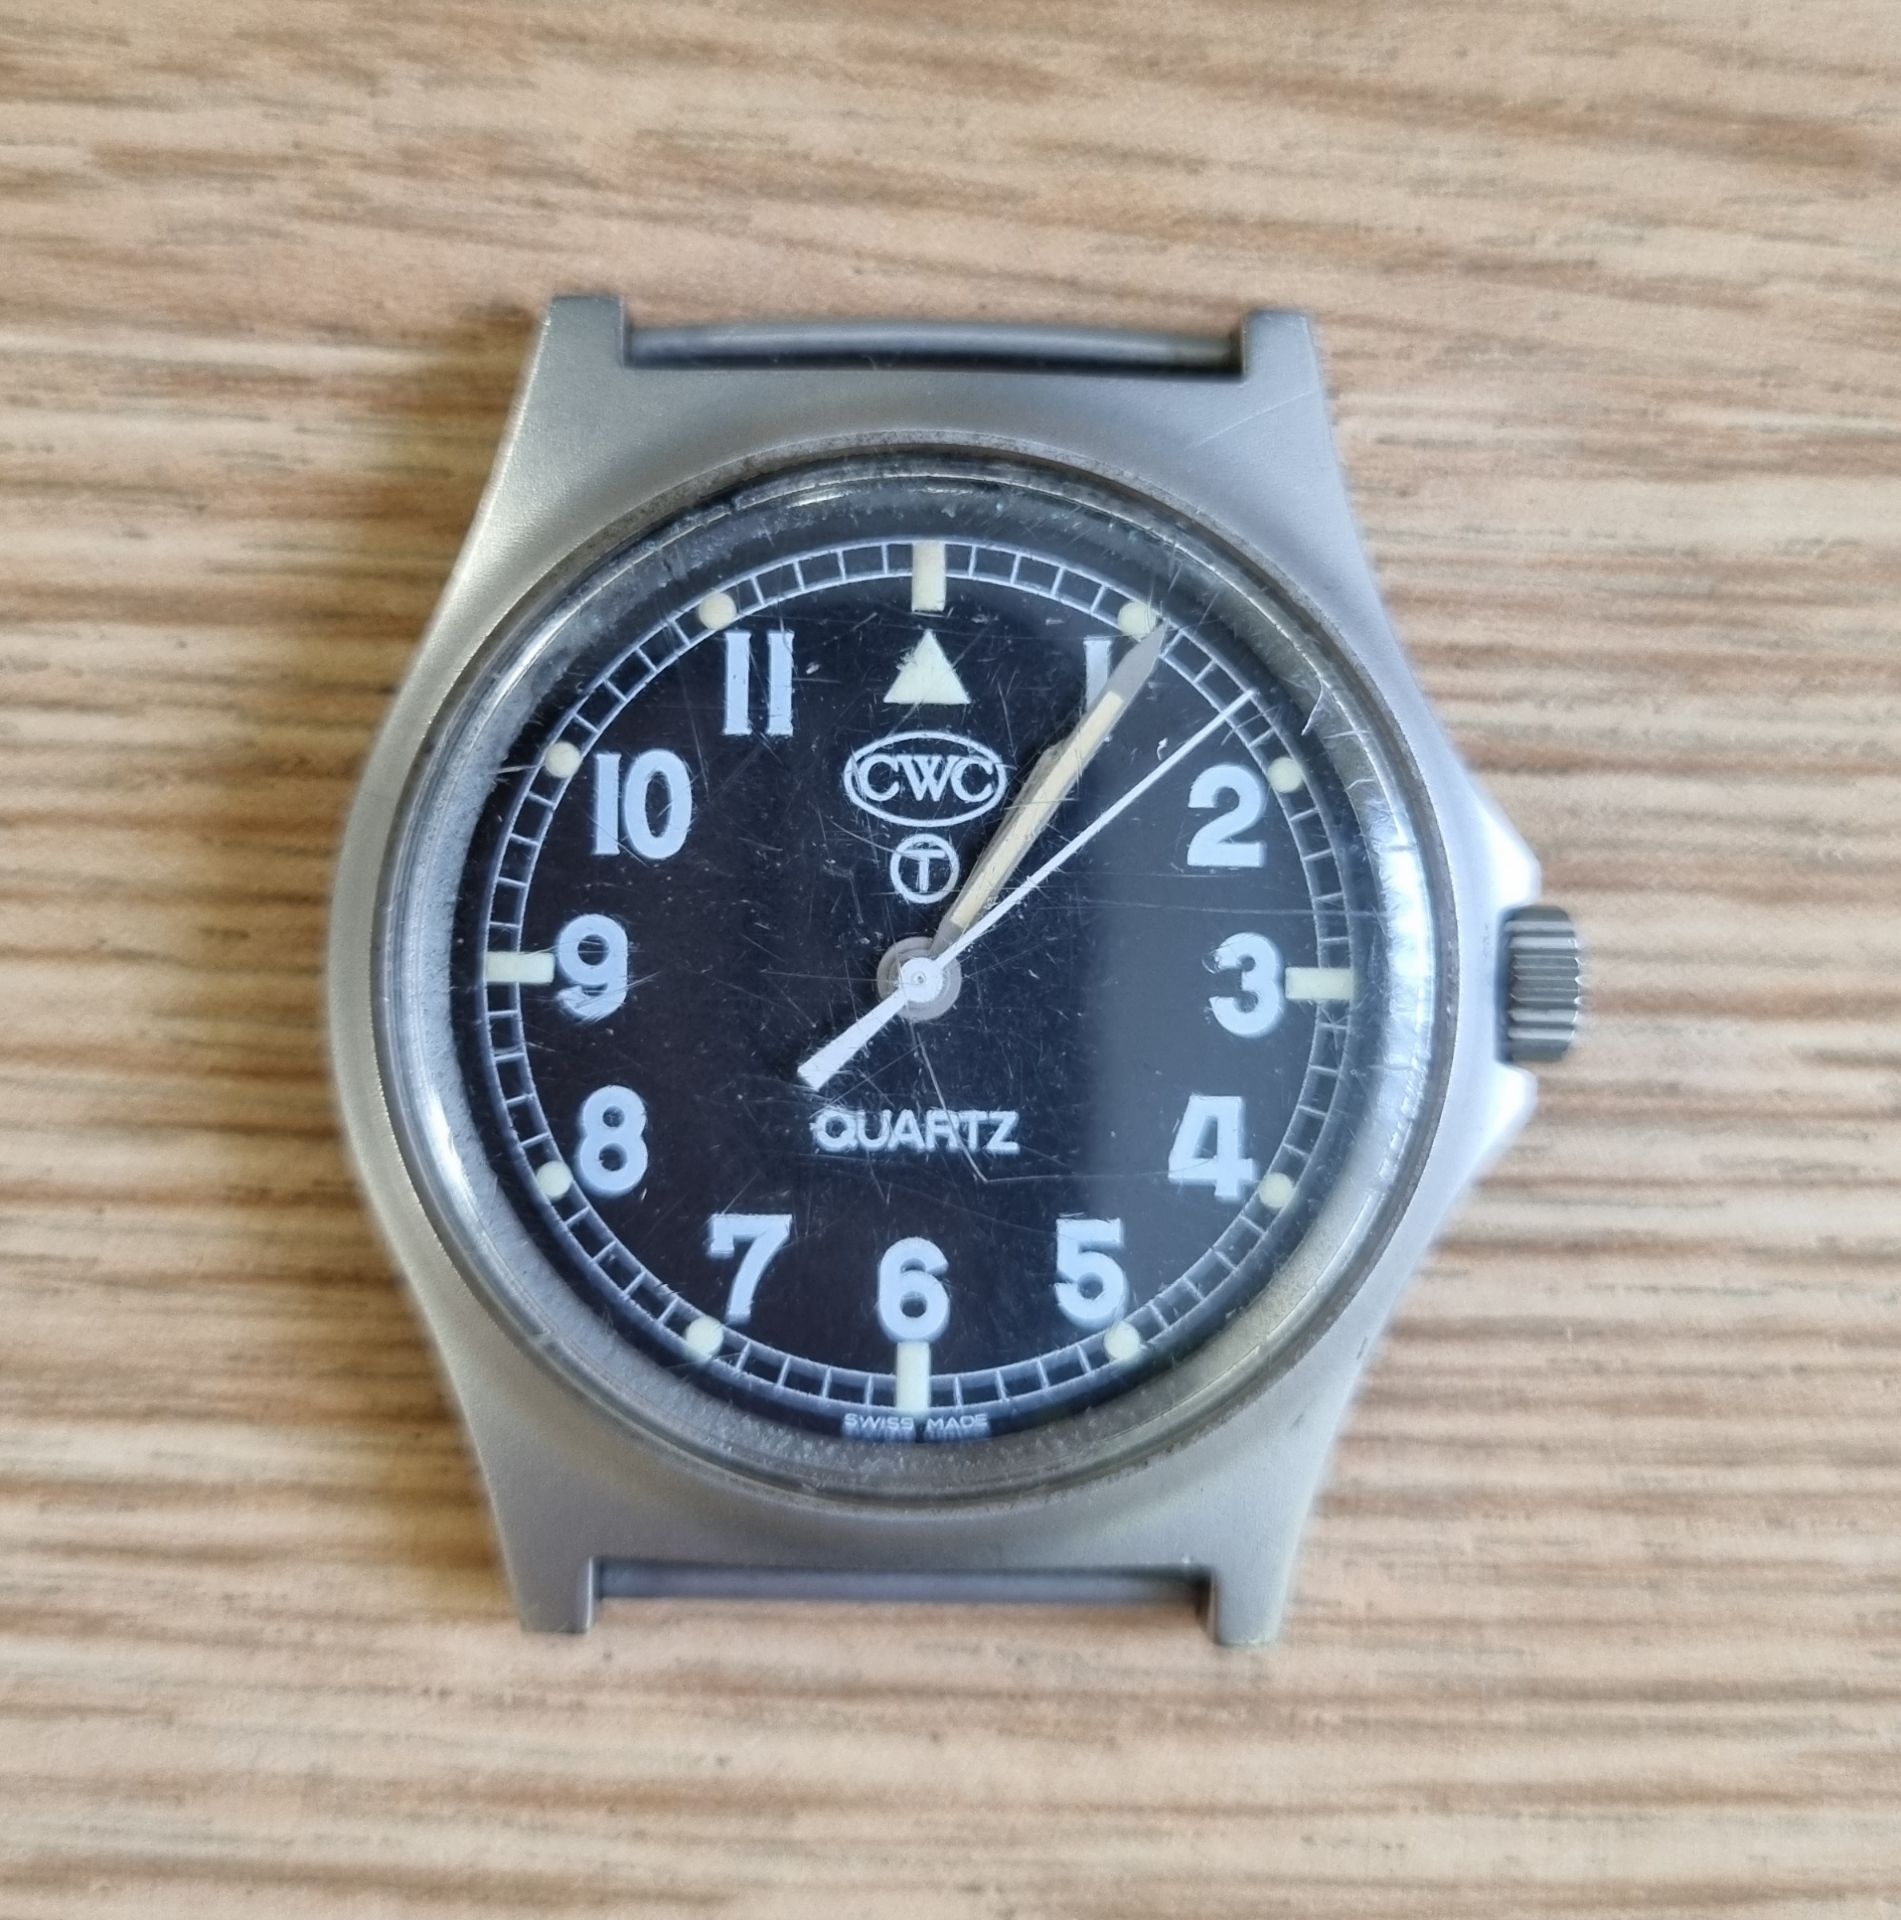 CWC G10 Military watch - 1990 - Image 3 of 3